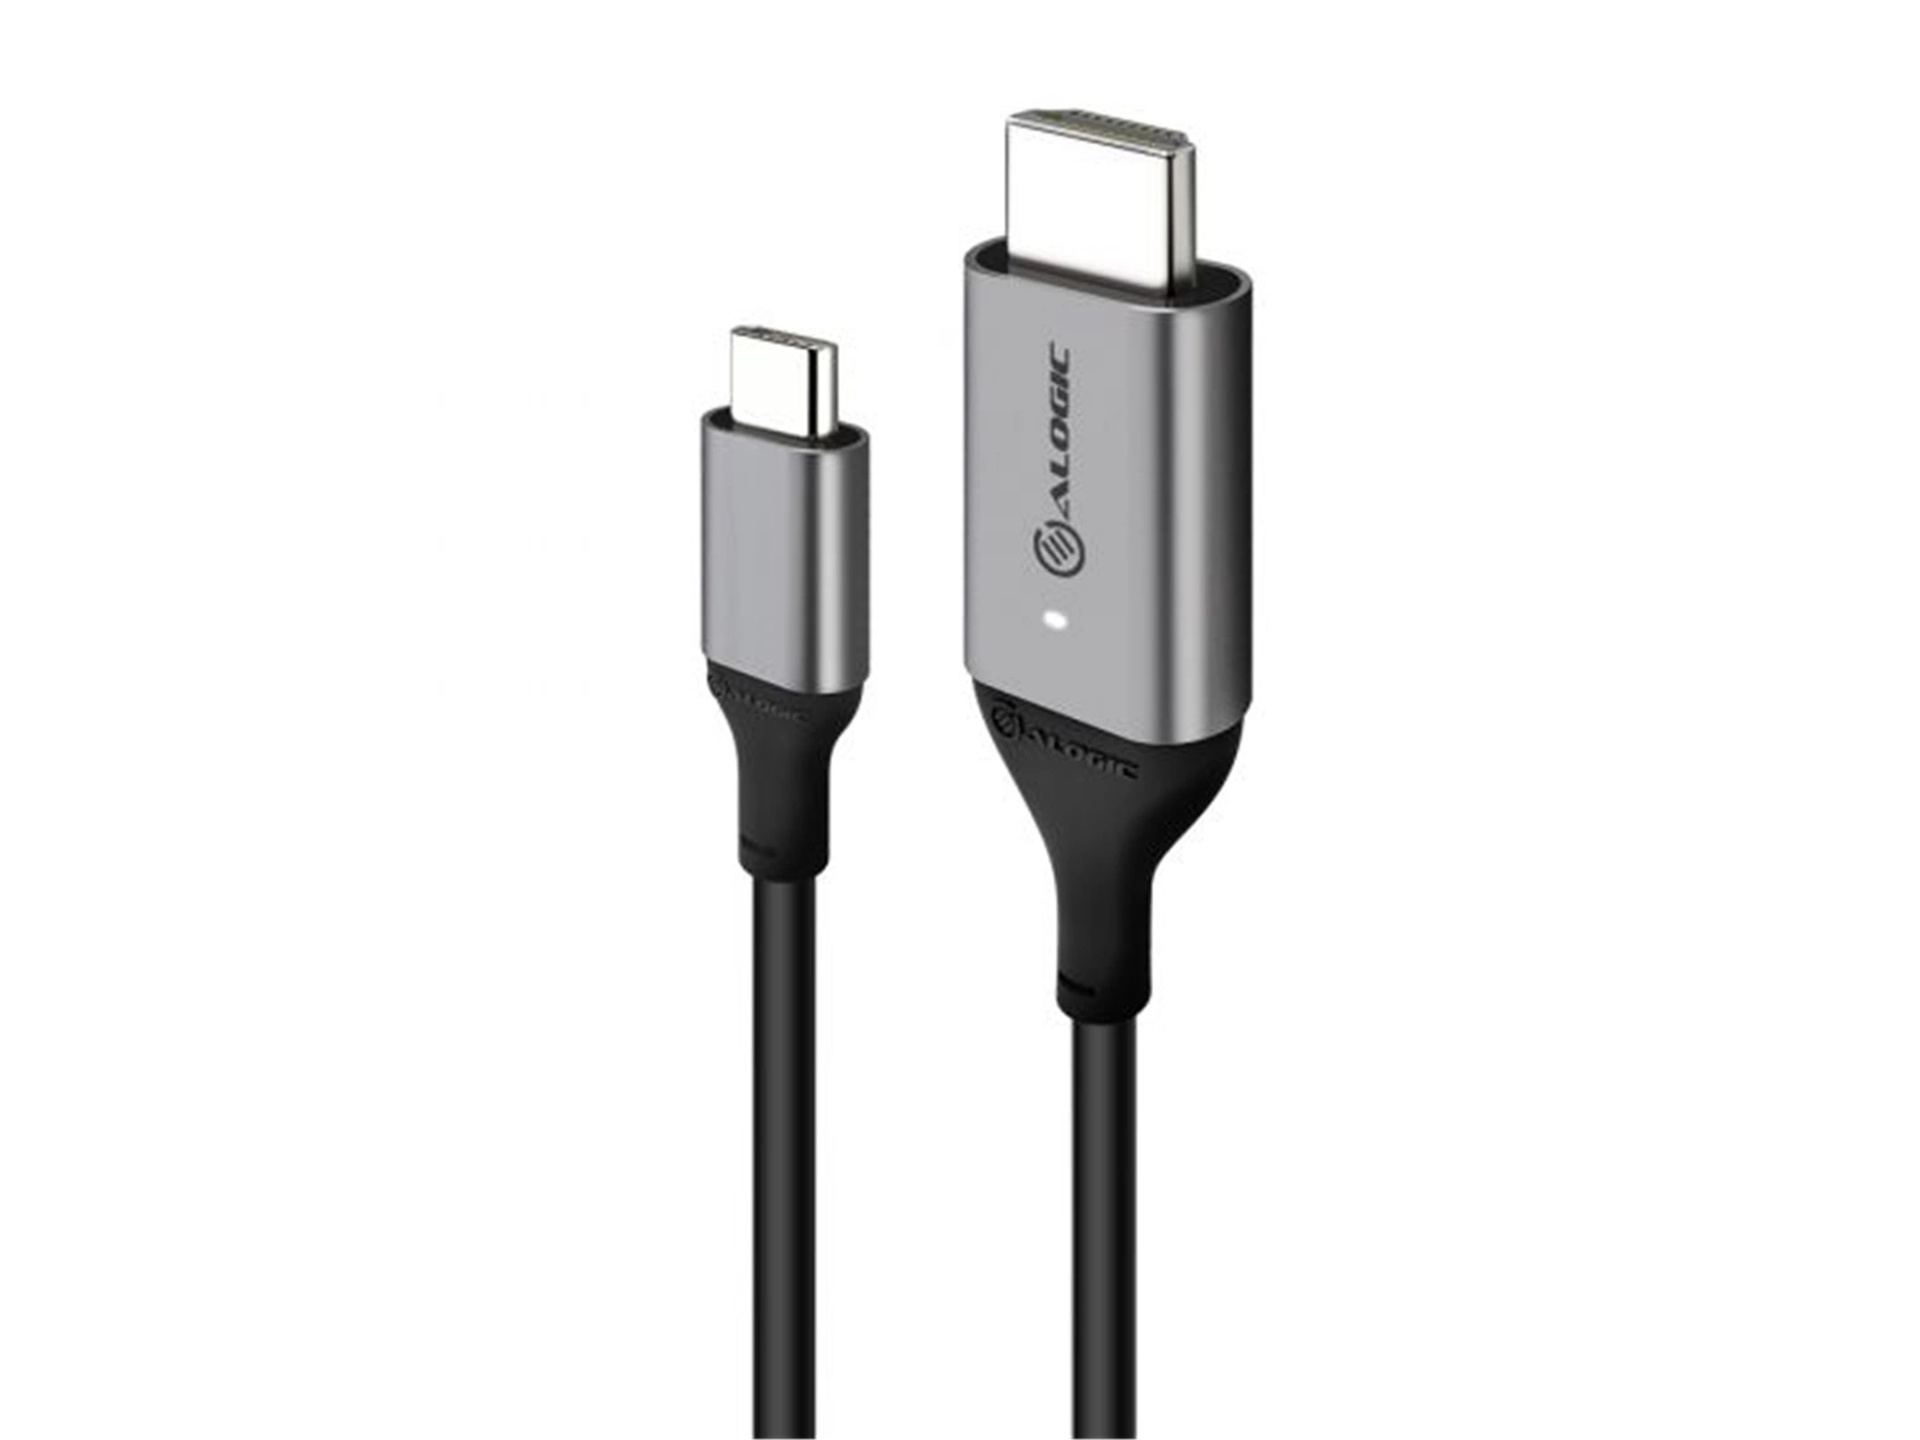 Alogic Ultra USB-C to HDMI Cable (2m)